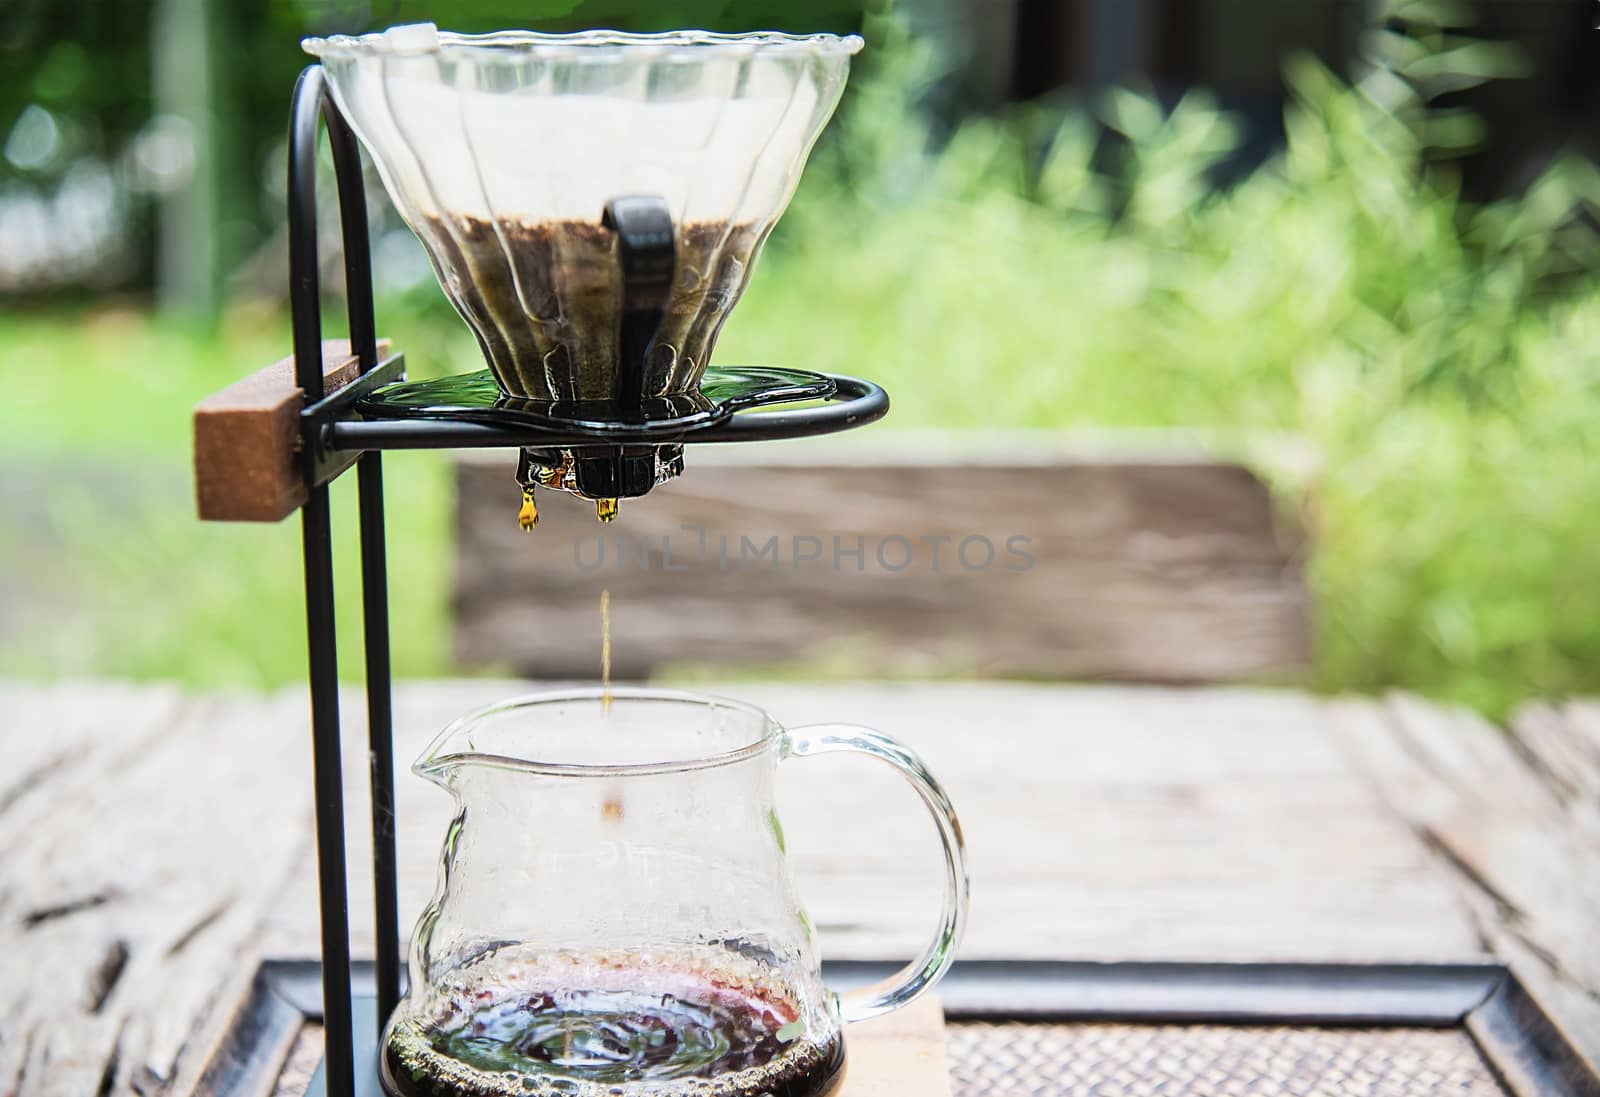 Making drip coffee in vintage coffee shop with green garden nature background - fresh coffee in nature concept